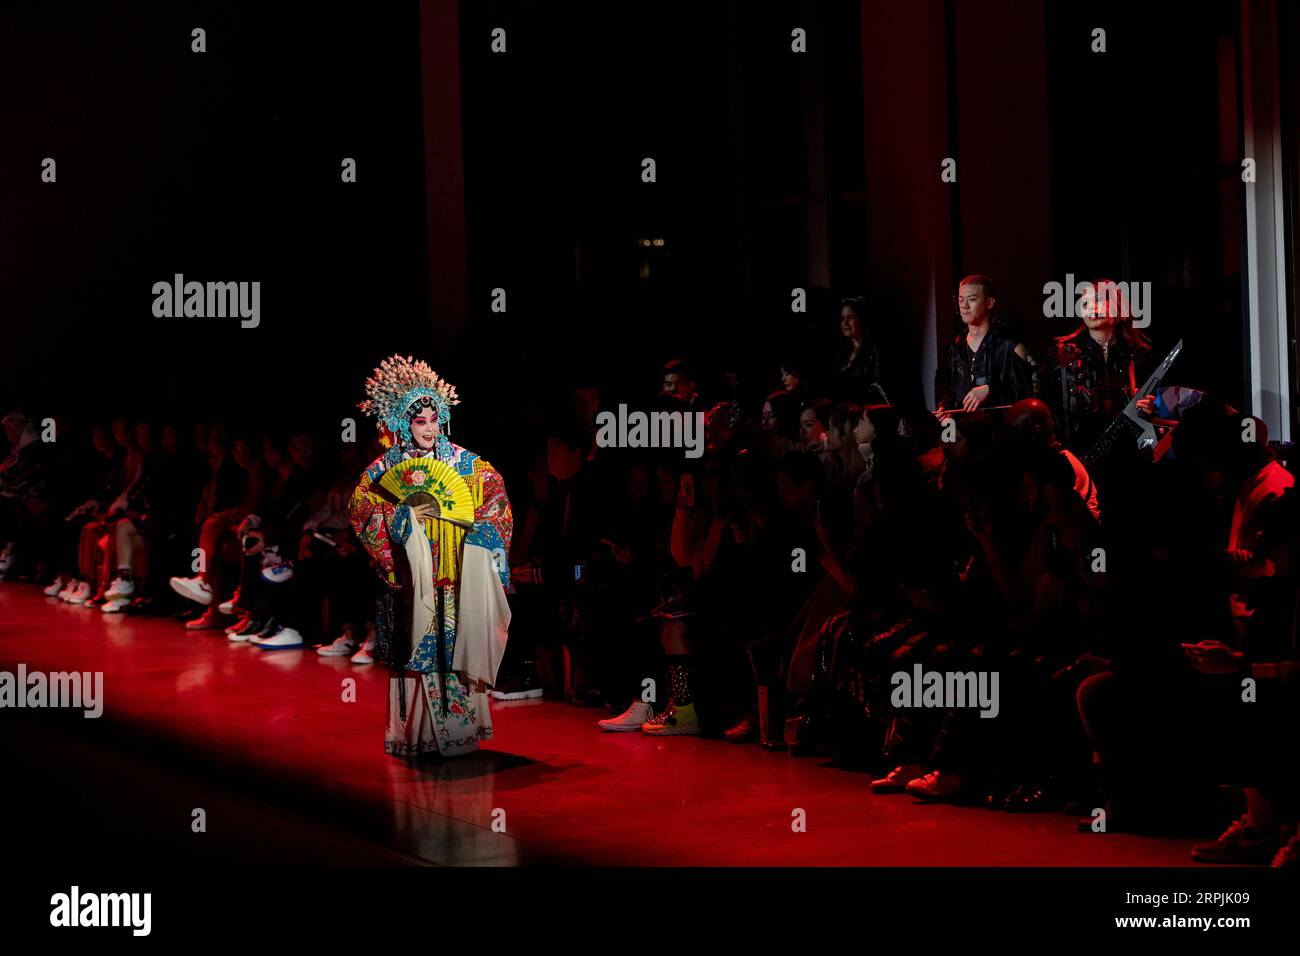 191212 -- NEW YORK, Dec. 12, 2019 -- An artist performs at the PONY X HARBIN show during the New York Fashion Week in New York, the United States, Feb. 9, 2019. The show started with a short music piece that was a fusion of Peking Opera and R&B, followed by a catwalk show debuting collection jointly presented by Chinese brand Harbin Beer and American sports brand PONY. In 2019, while the bilateral relationship between China and the United States is going through some rough patches at the national level, wide-ranging exchanges and cooperation at the subnational level have not been losing steam. Stock Photo